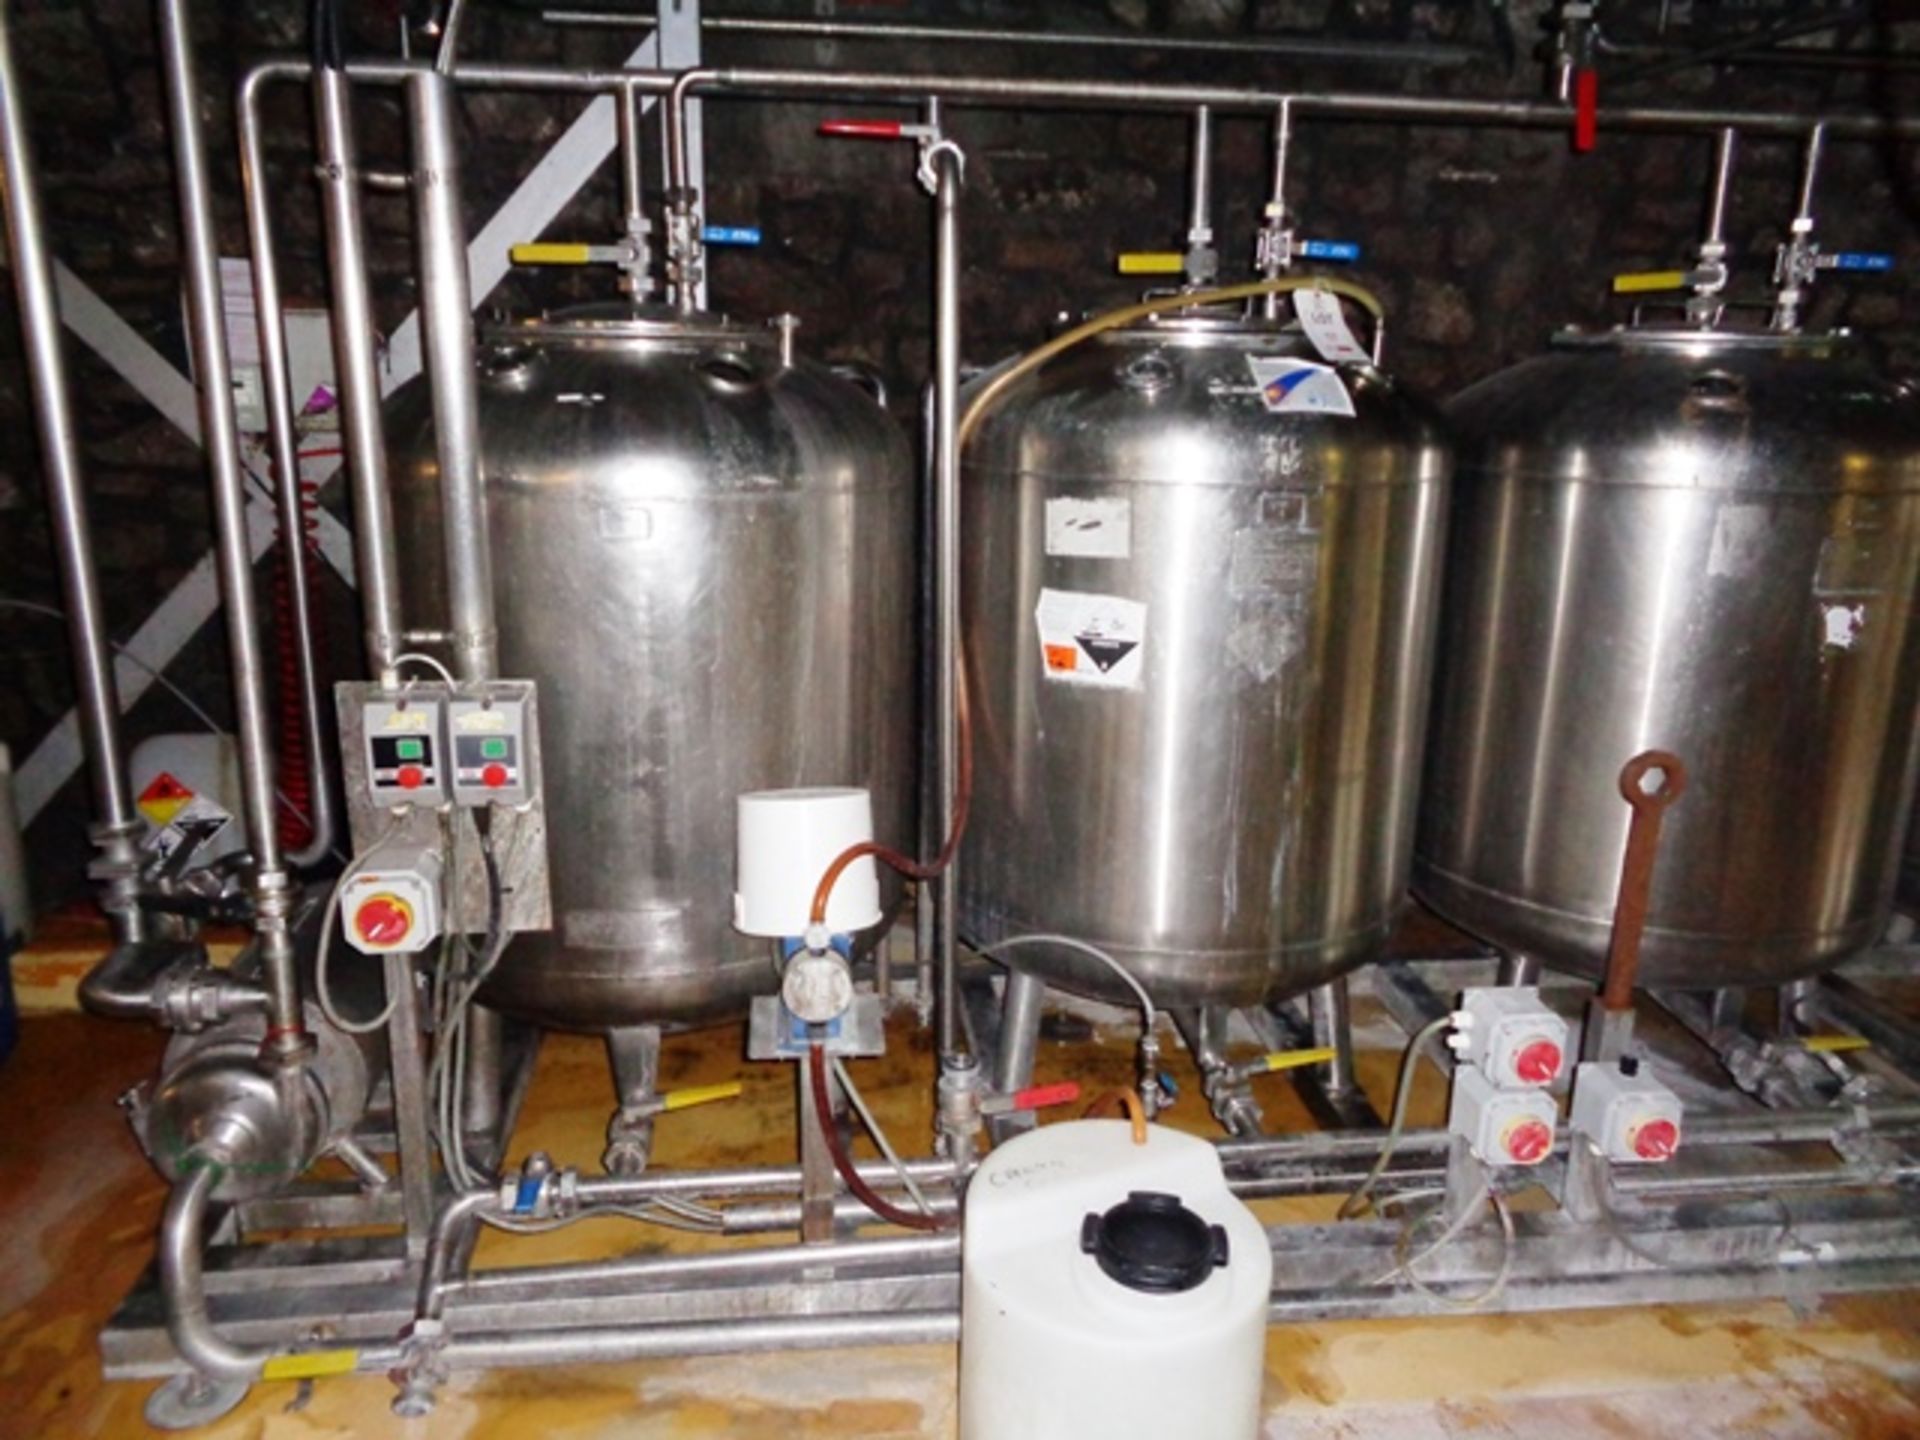 Bedford stainless 4 tank CIP system mounted on stainless steel framed skid, 4 x Fabdec 180 gallon - Image 4 of 11